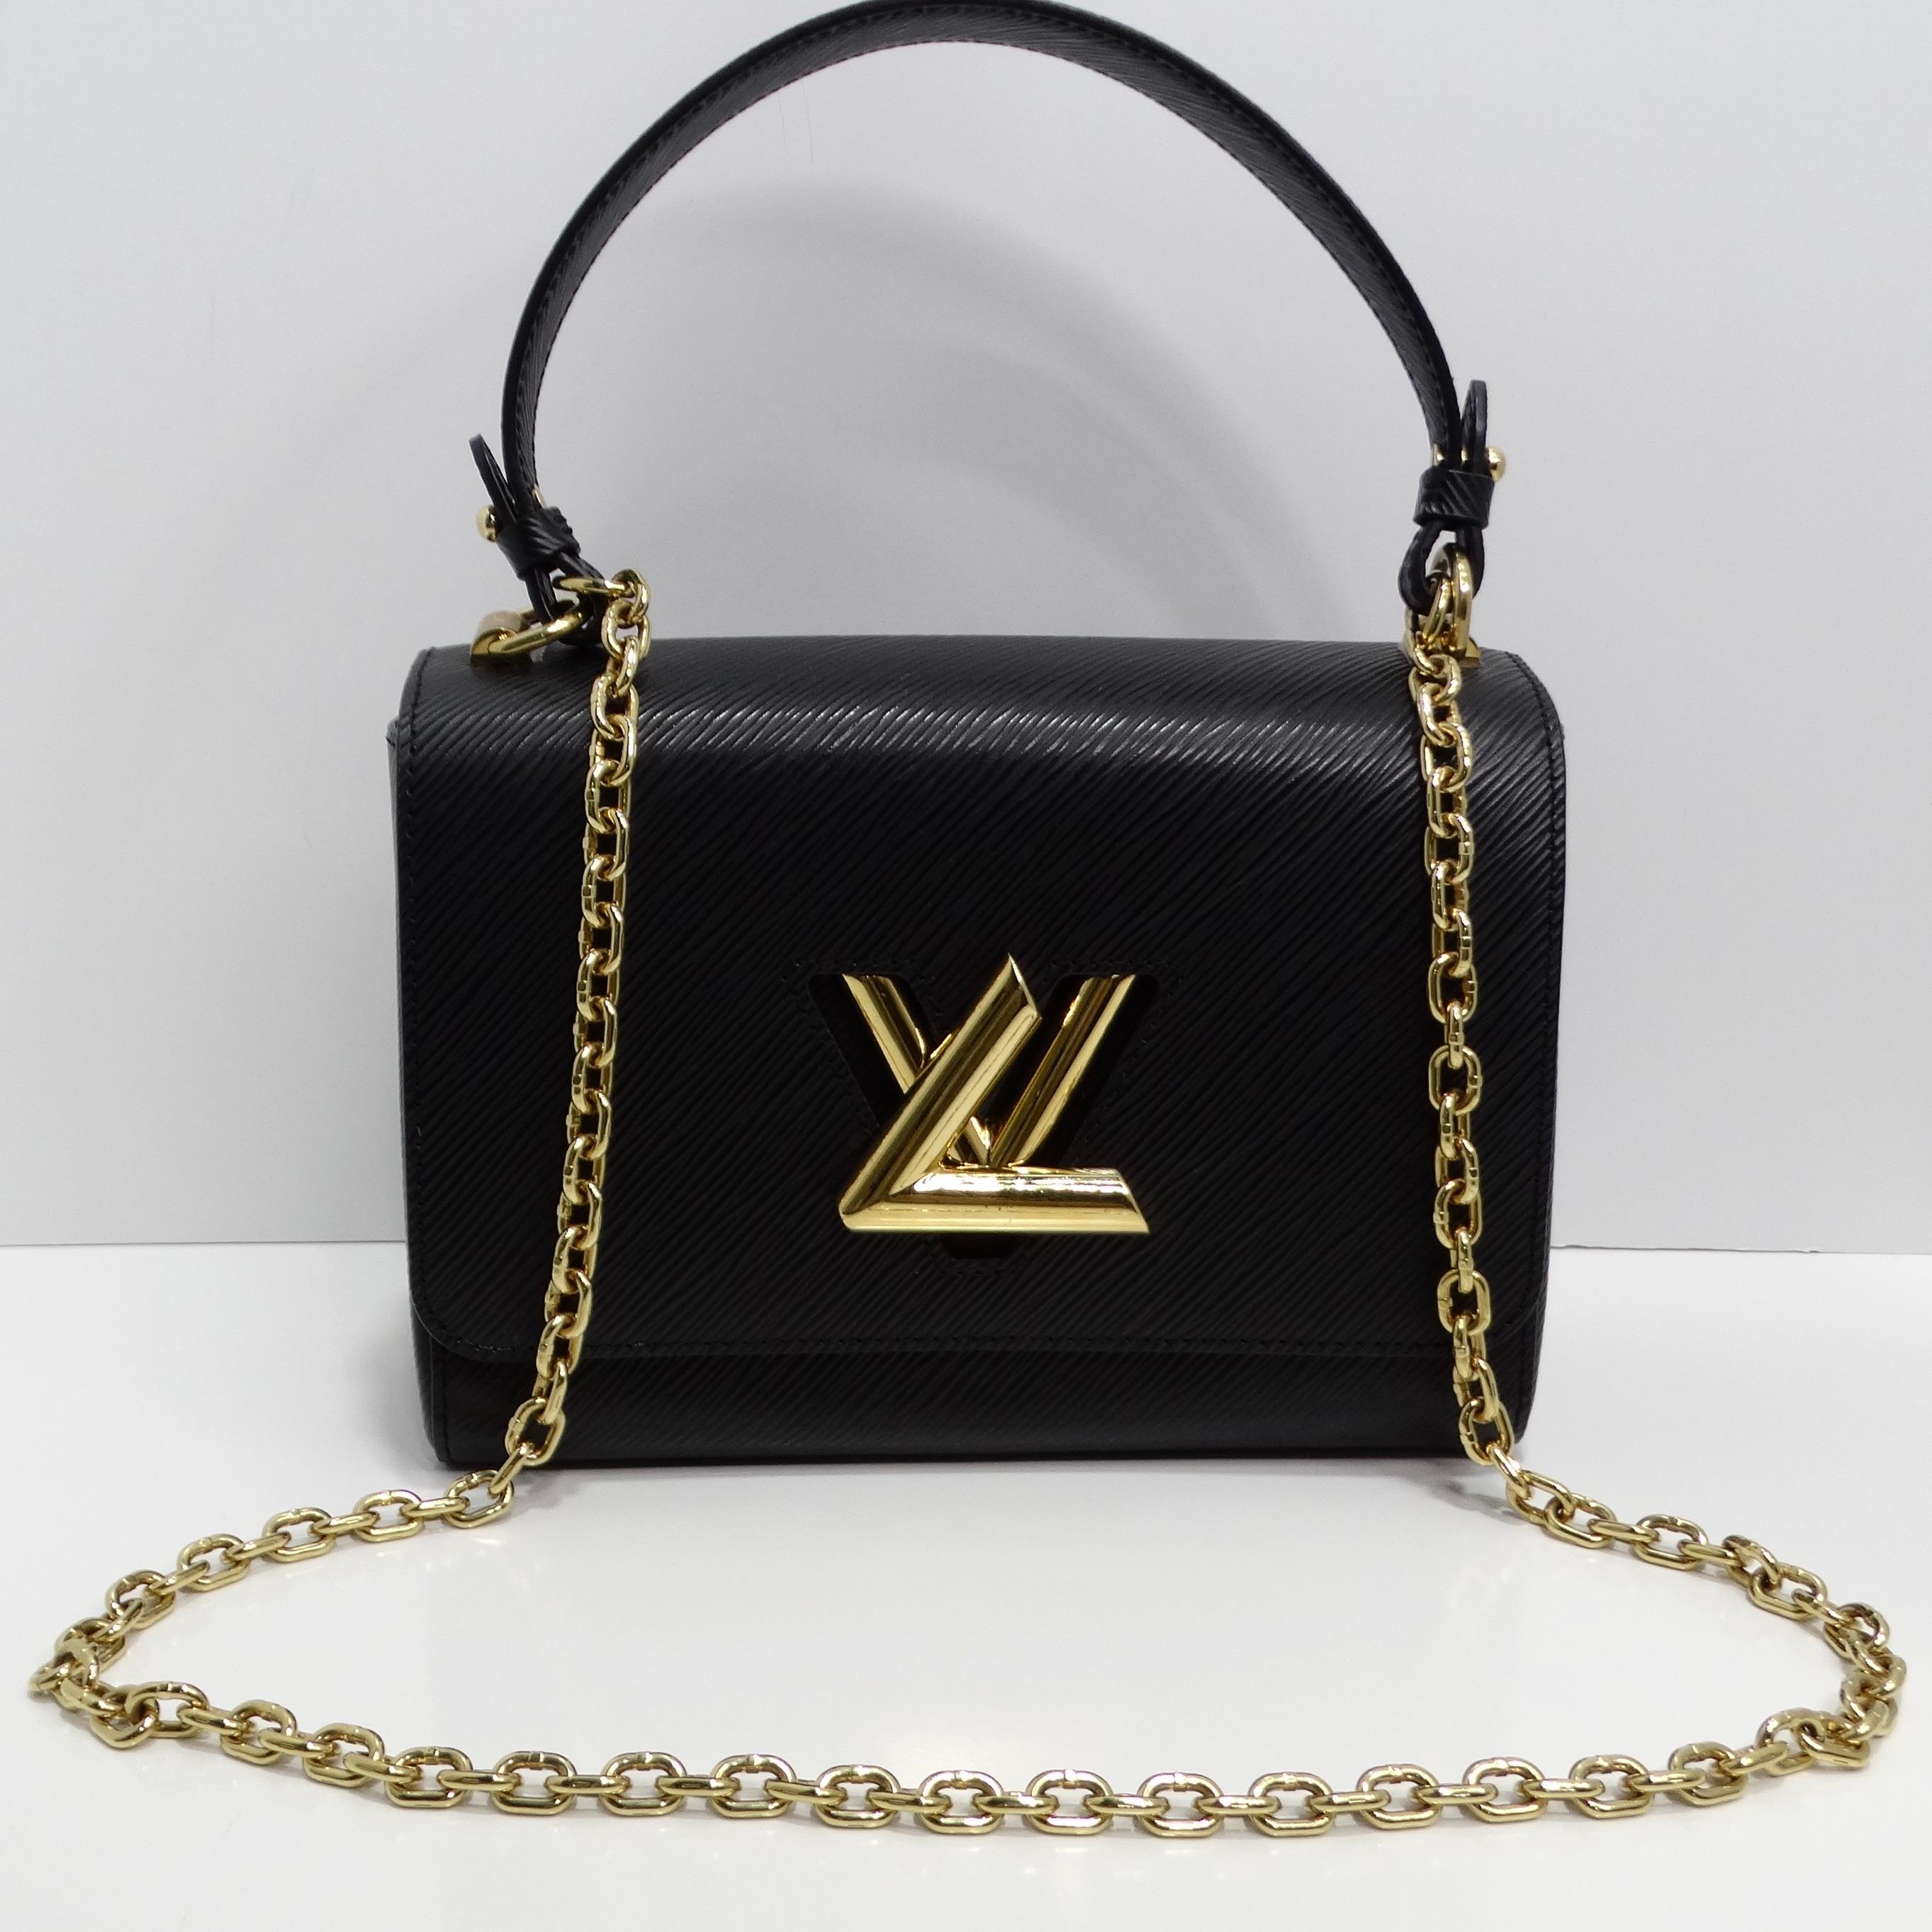 Introducing the Louis Vuitton Epi Twist Top Handle Shoulder Bag, a chic and versatile accessory that seamlessly combines style and functionality. Crafted from textured epi leather in classic black, this shoulder bag exudes sophistication and